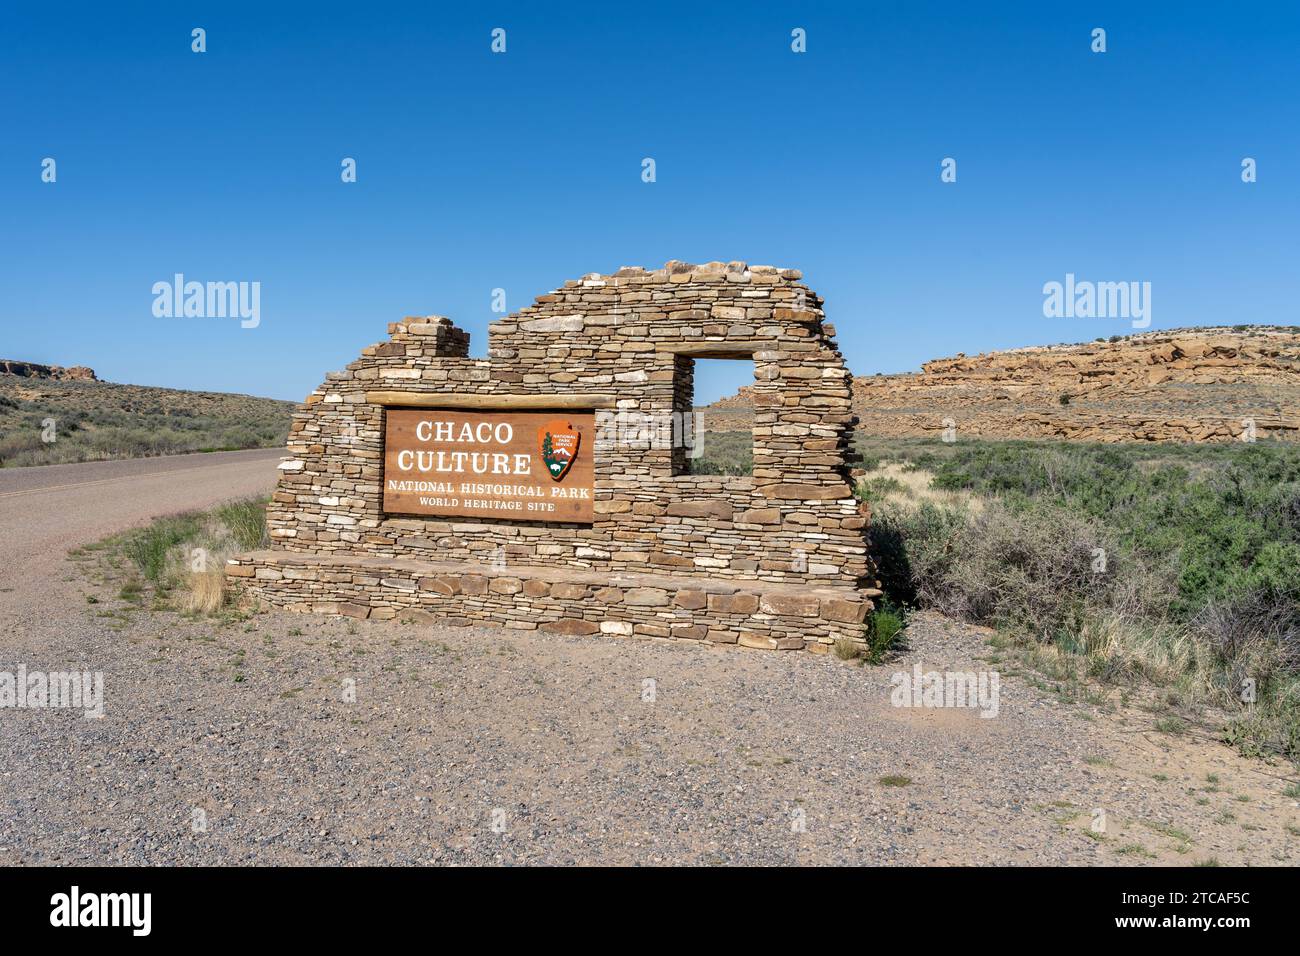 The entrance sign of Chaco Culture National Historical Park in New Mexico, USA, Stock Photo